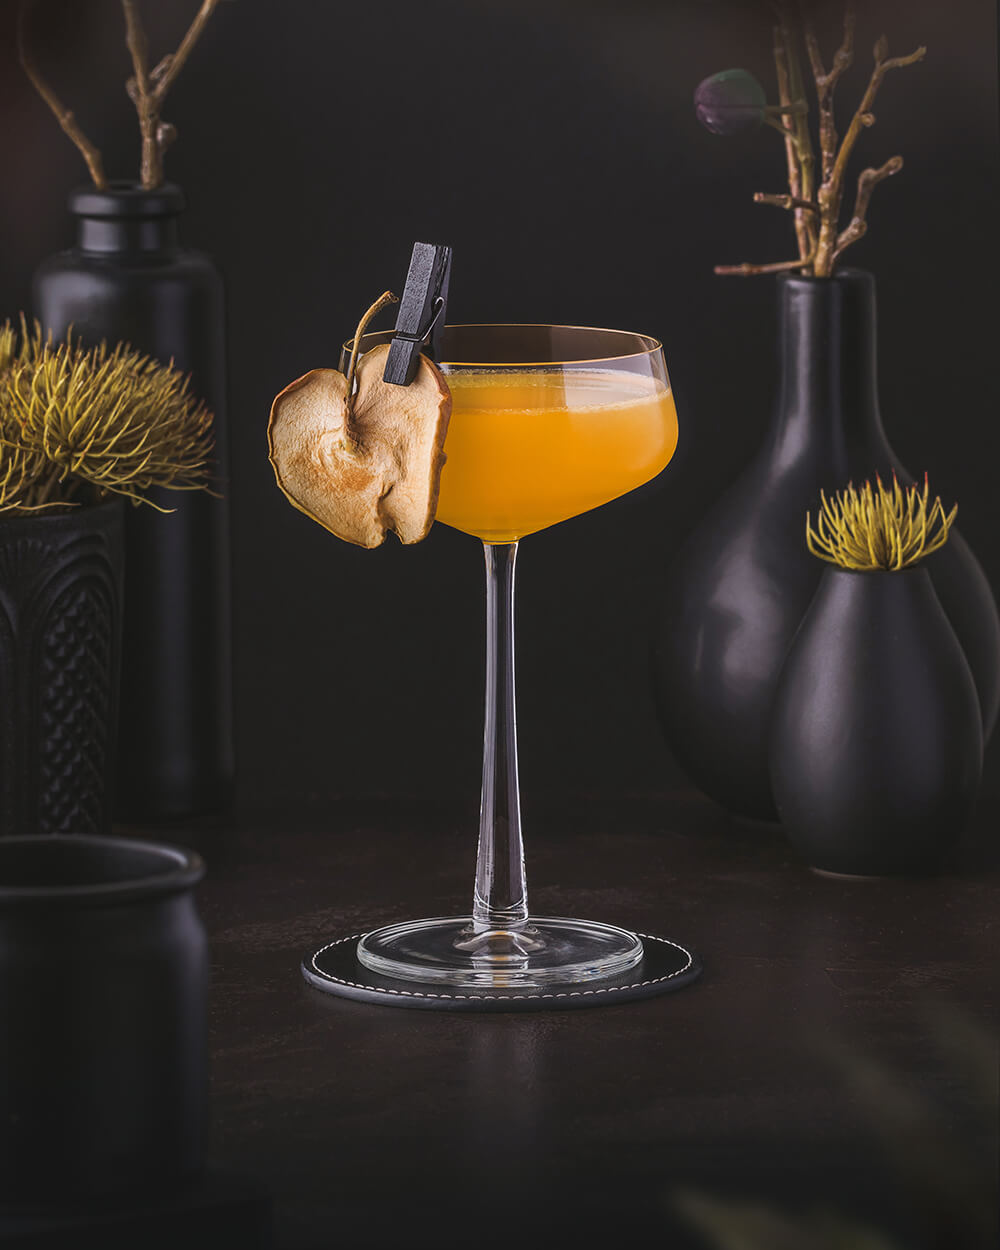 Applejack Rabbit - Yellow orange cocktail with apple brandy, maple syrup and orange juice. Garnished with a dried apple slice.